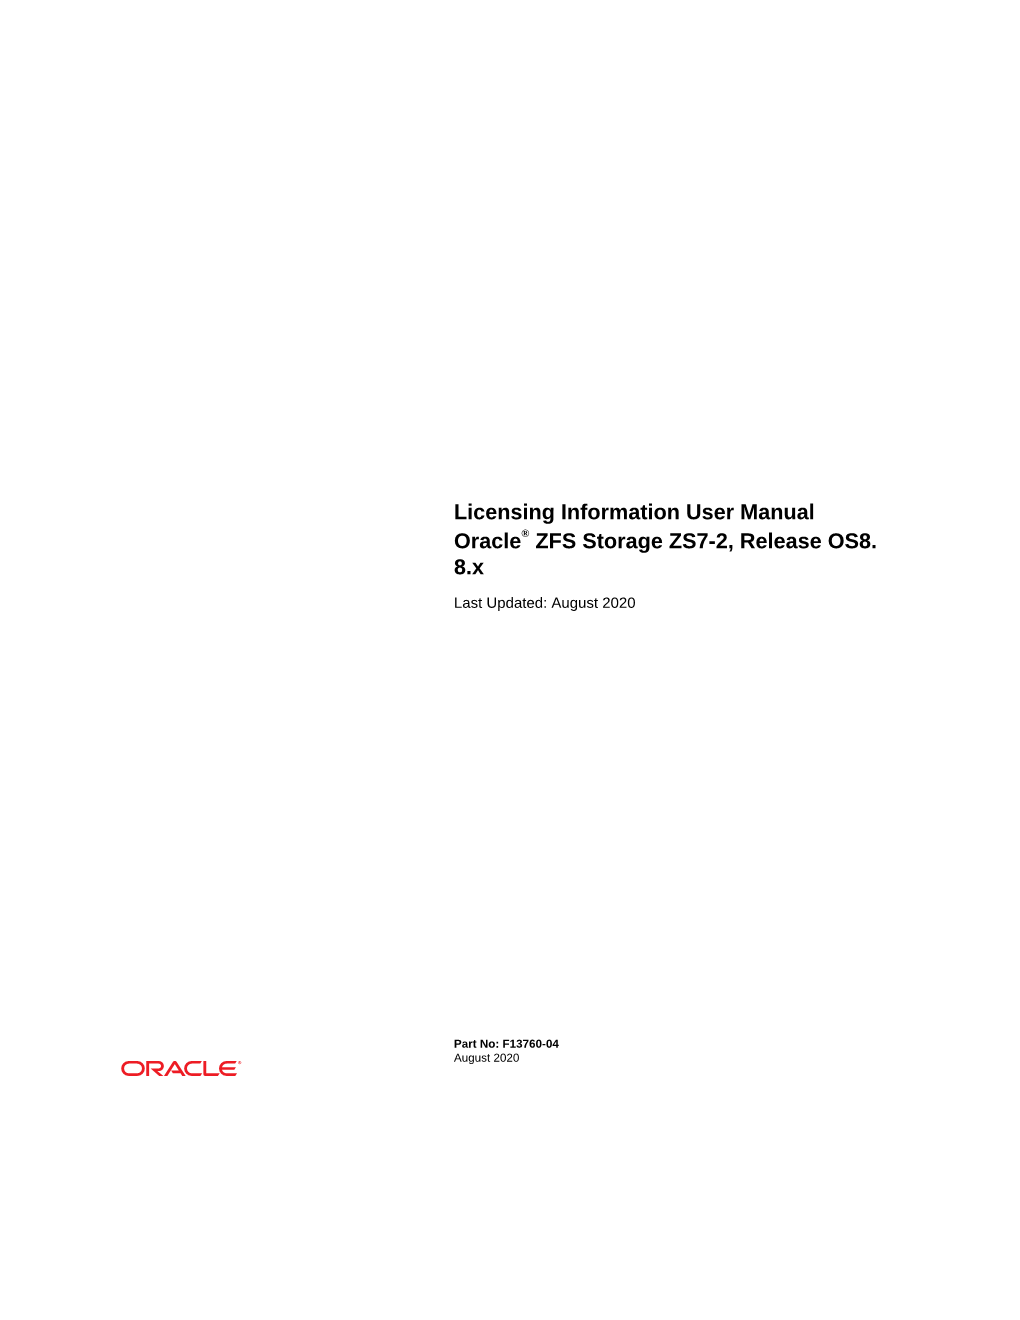 Licensing Information User Manual Oracle® ZFS